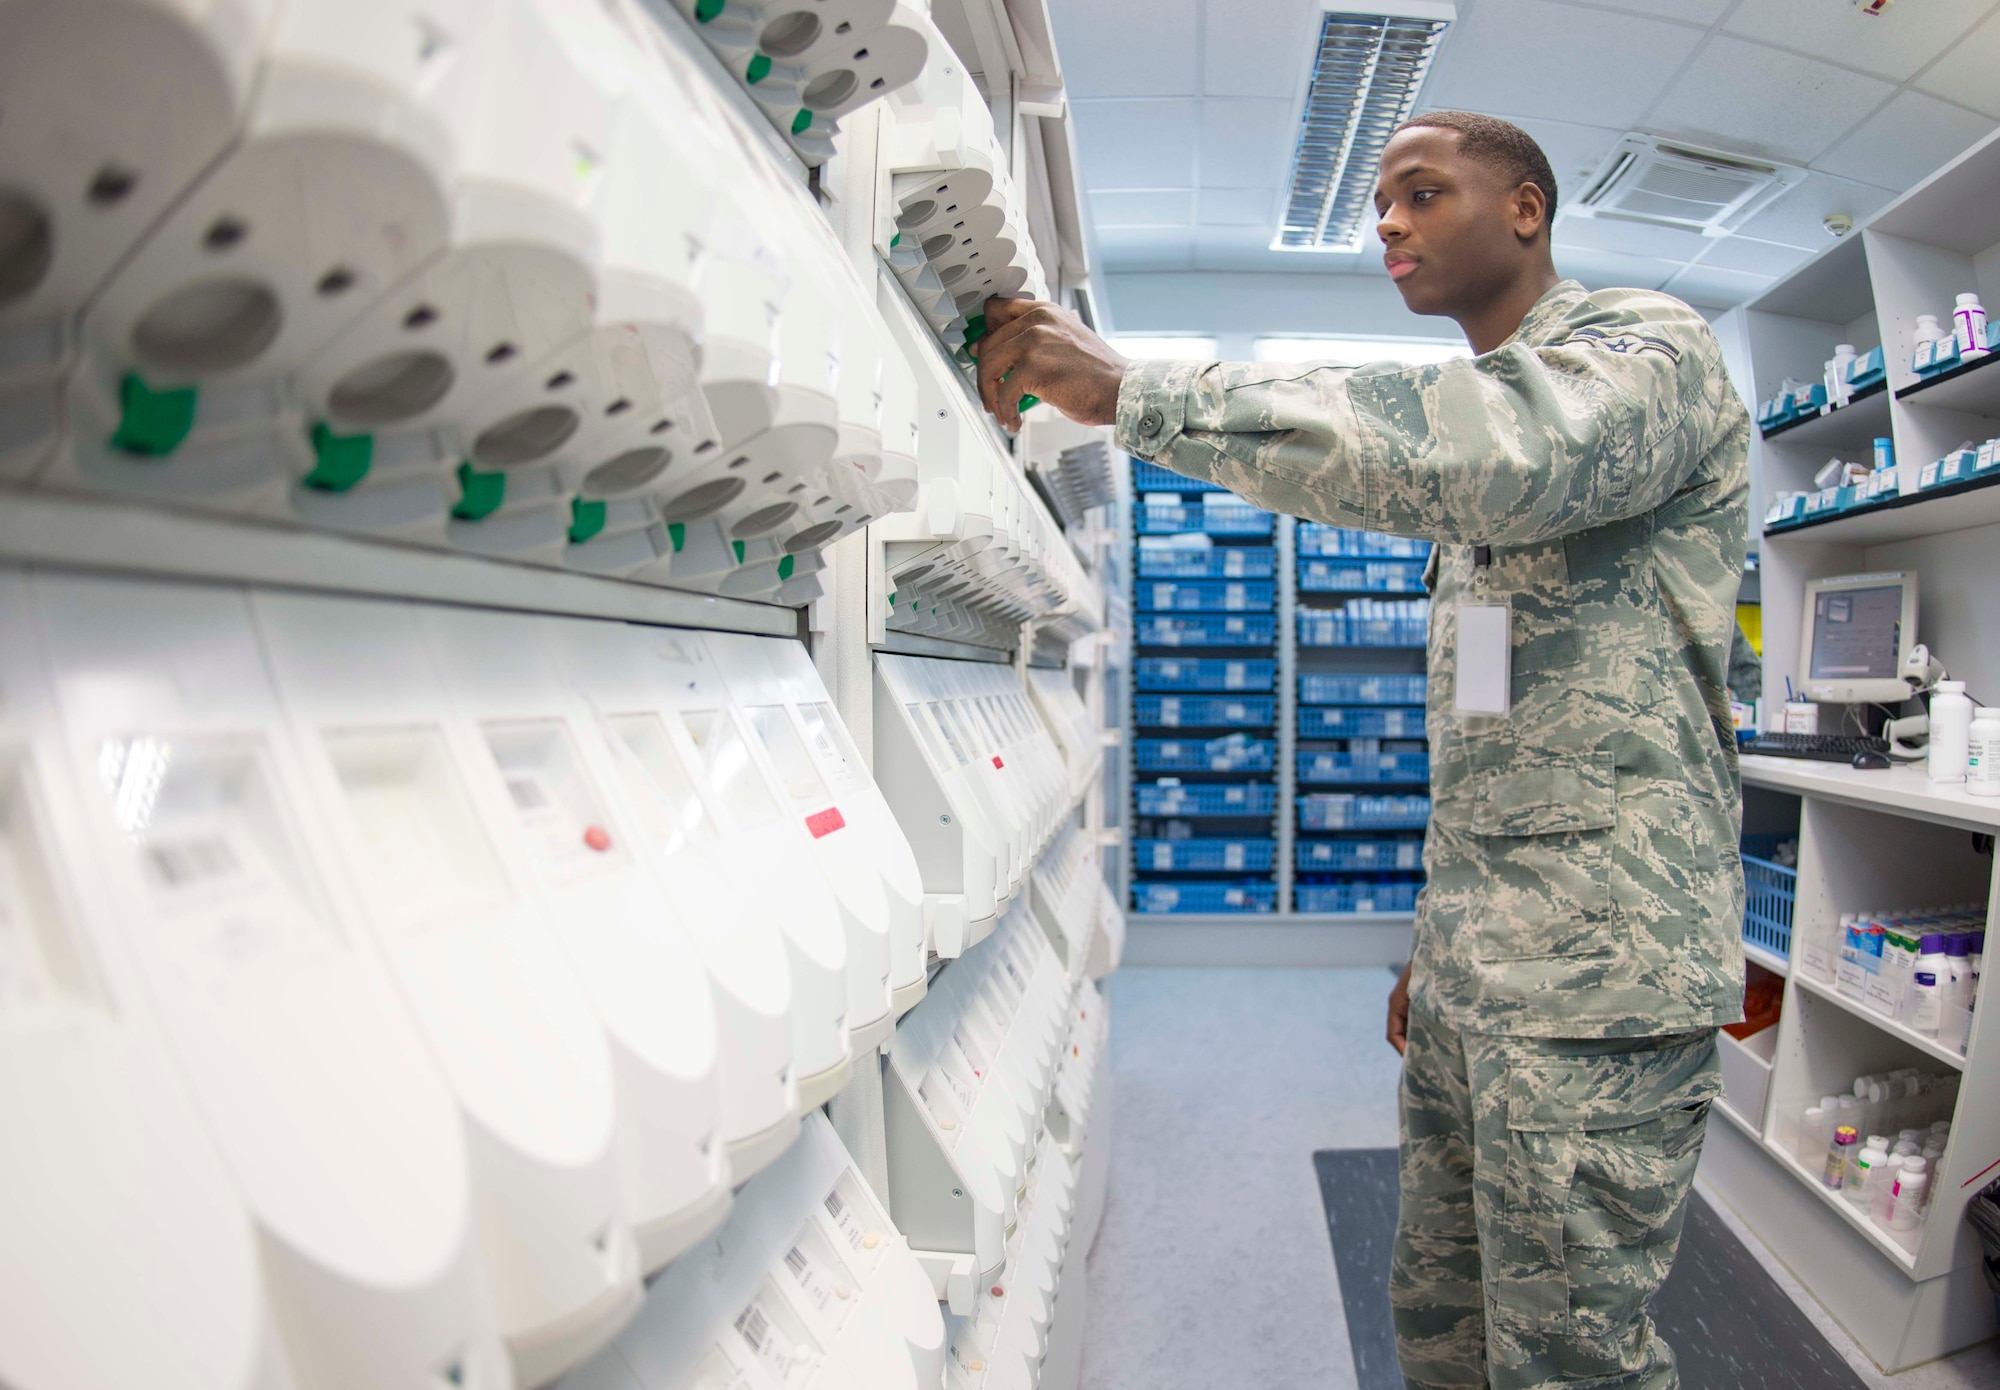 Airman 1st Class Jasiah Sellars, 86th Medical Squadron Pharmacy apprentice, counts medication for a prescription on Ramstein Air Base, Germany, Oct. 25, 2017.